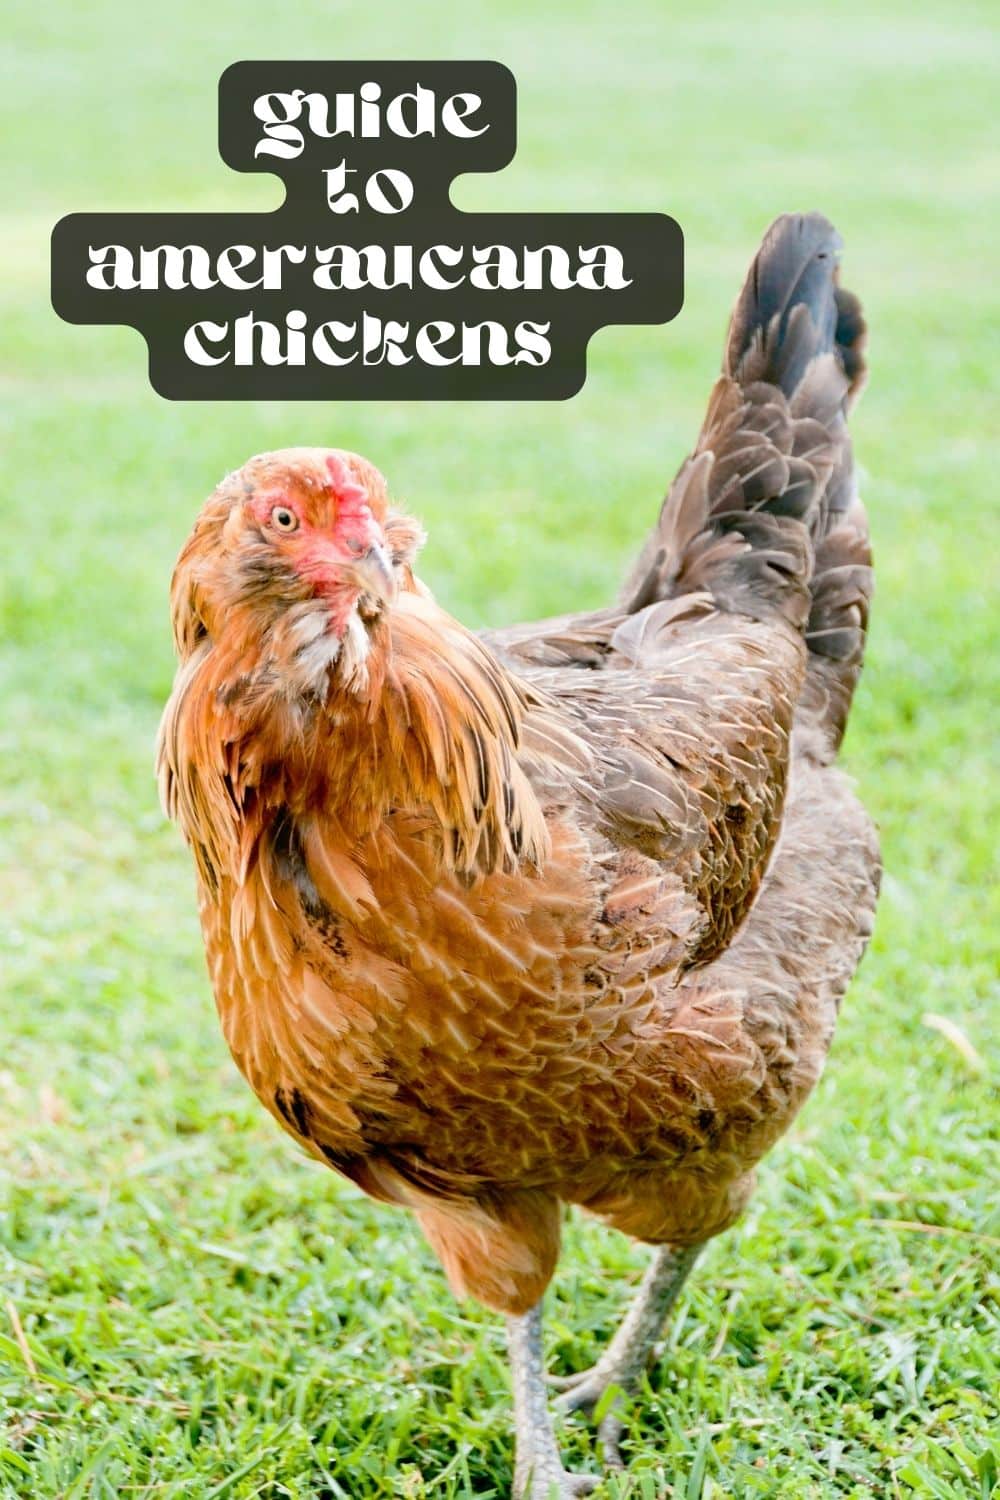 Did you know Americana chickens can lay blue eggs? Learn everything you need to know about Ameraucana and Americana chickens, with helpful tips on temperament, care, and egg-laying in this comprehensive guide!